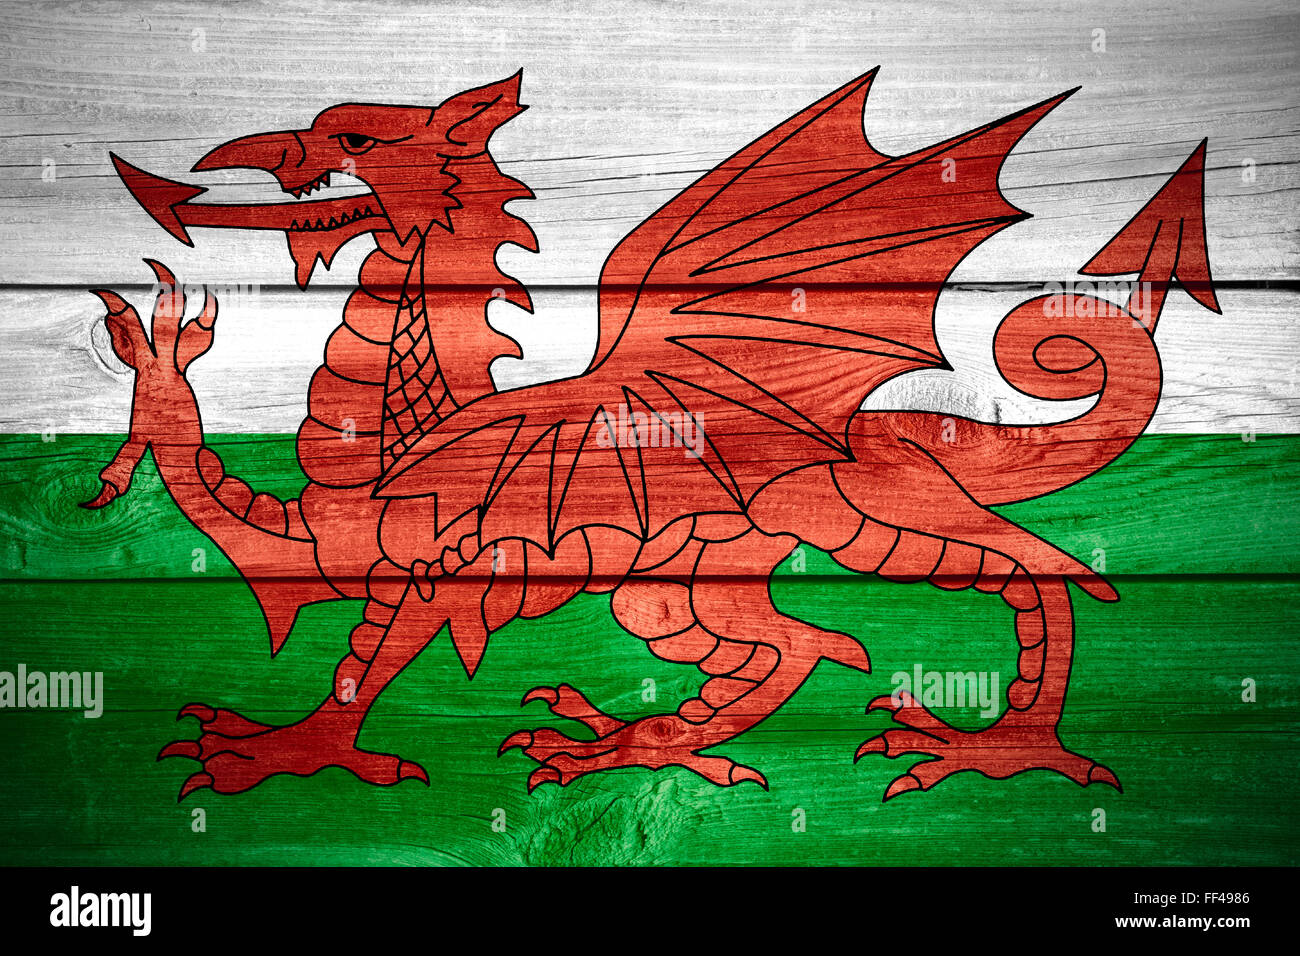 flag of Wales or Welsh banner on wooden background Stock Photo